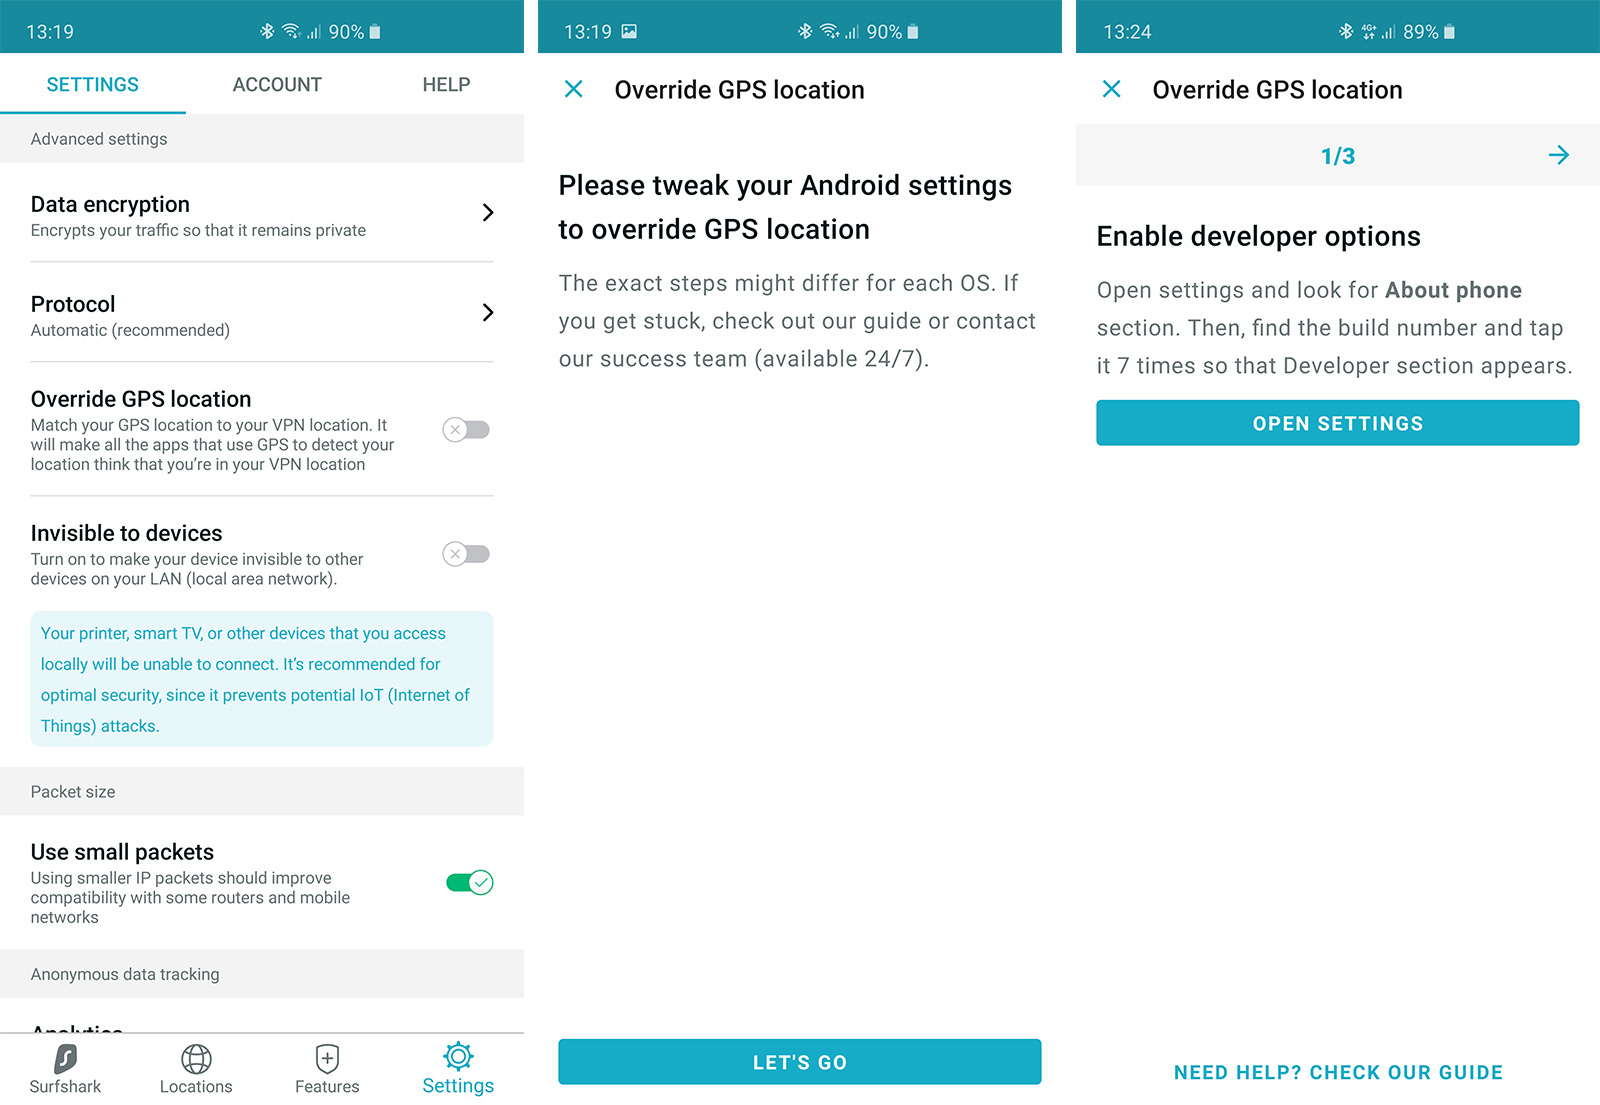 Surfshark GPS Spoofing Android